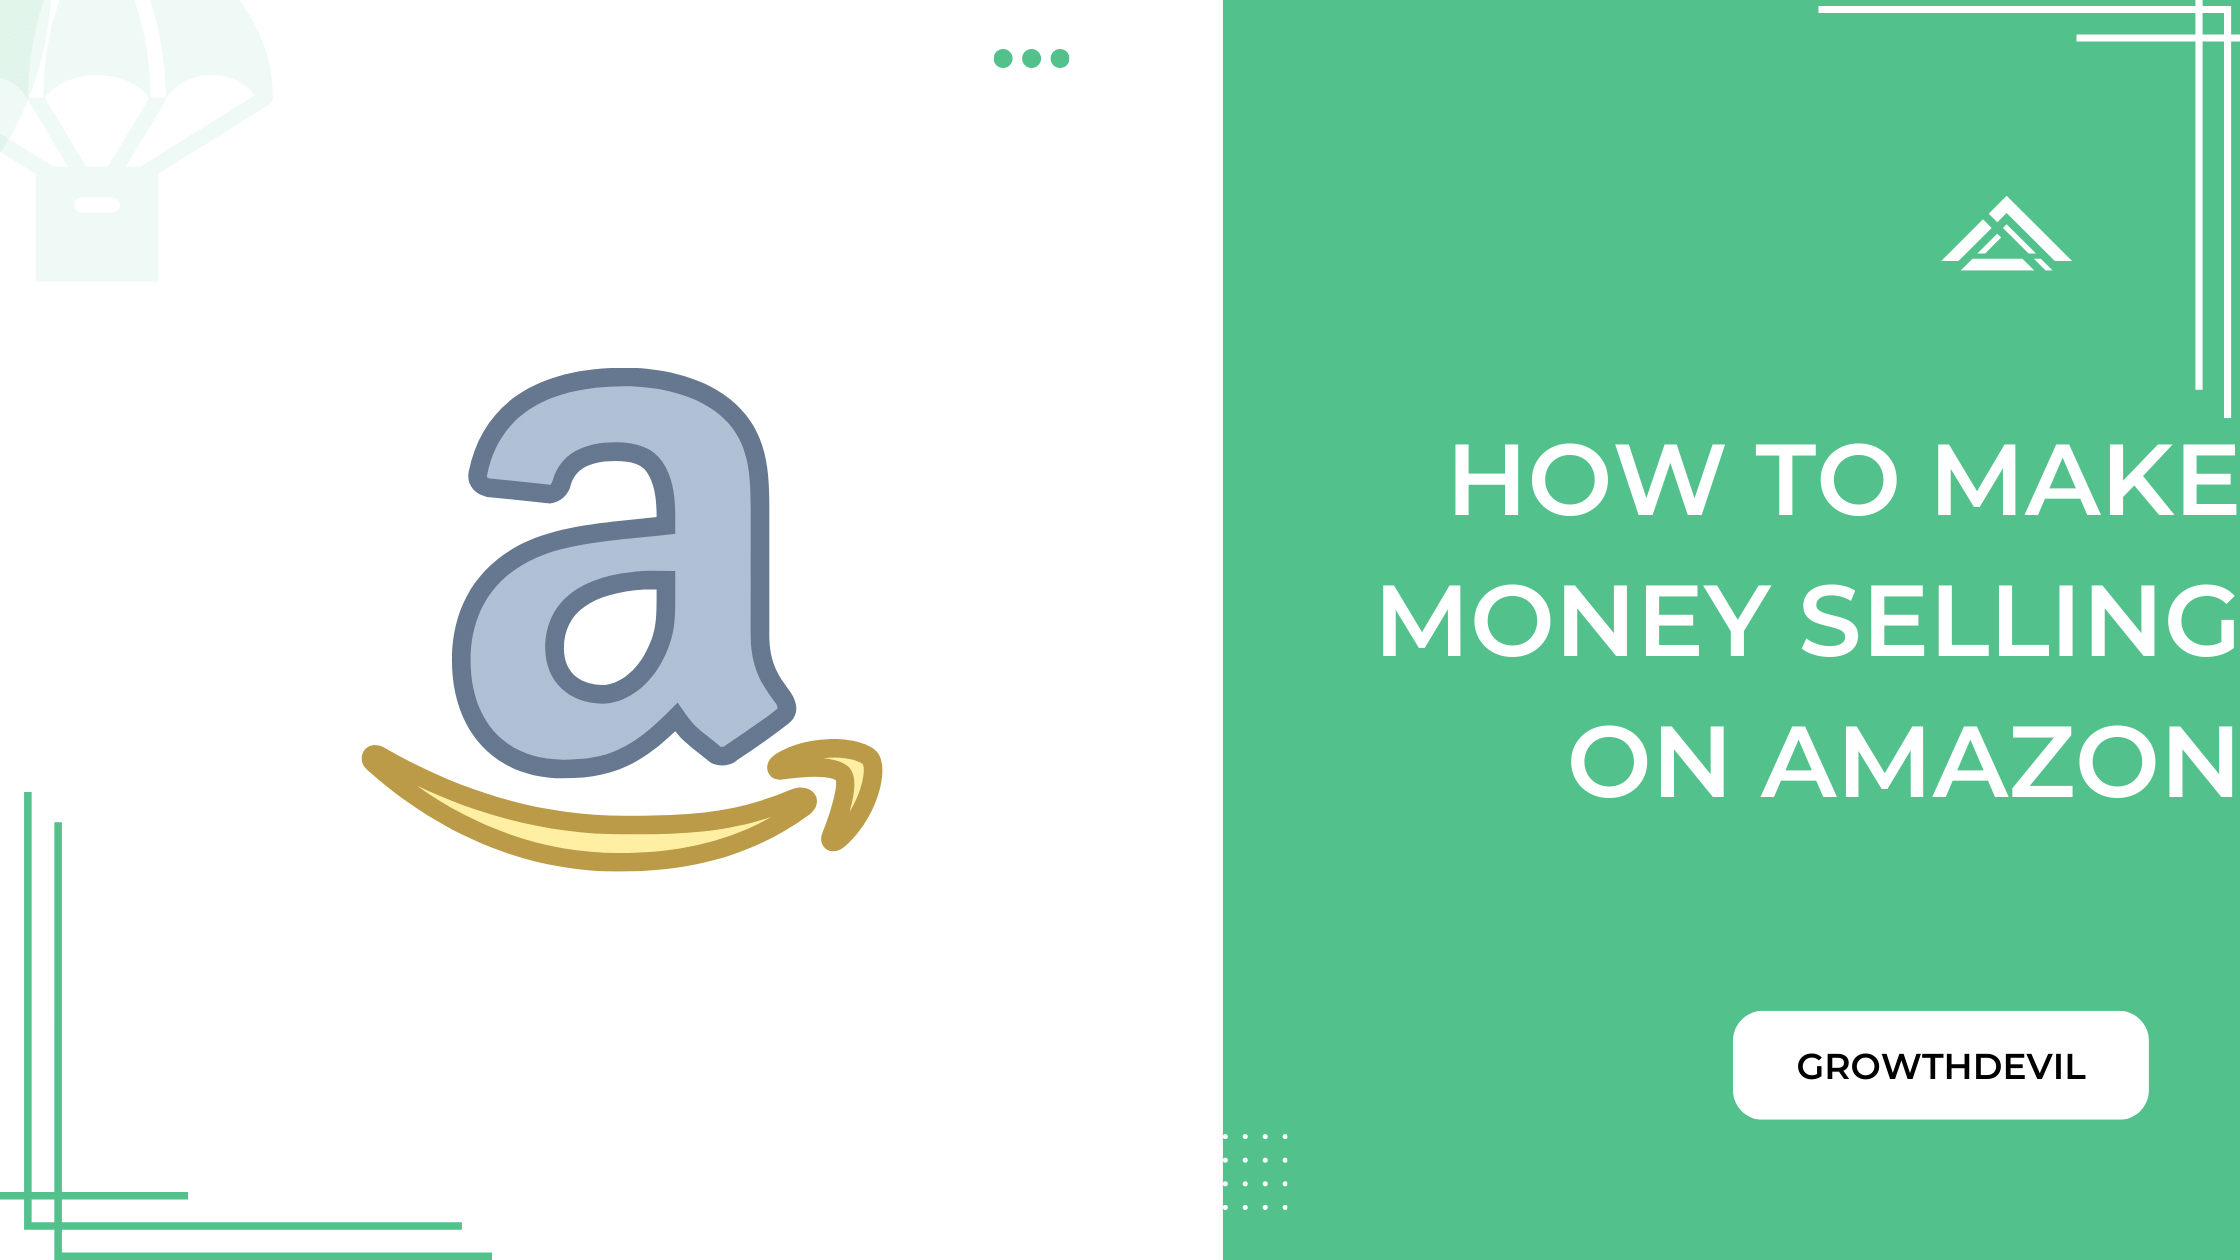 How To Make Money Selling On Amazon - GrowthDevil